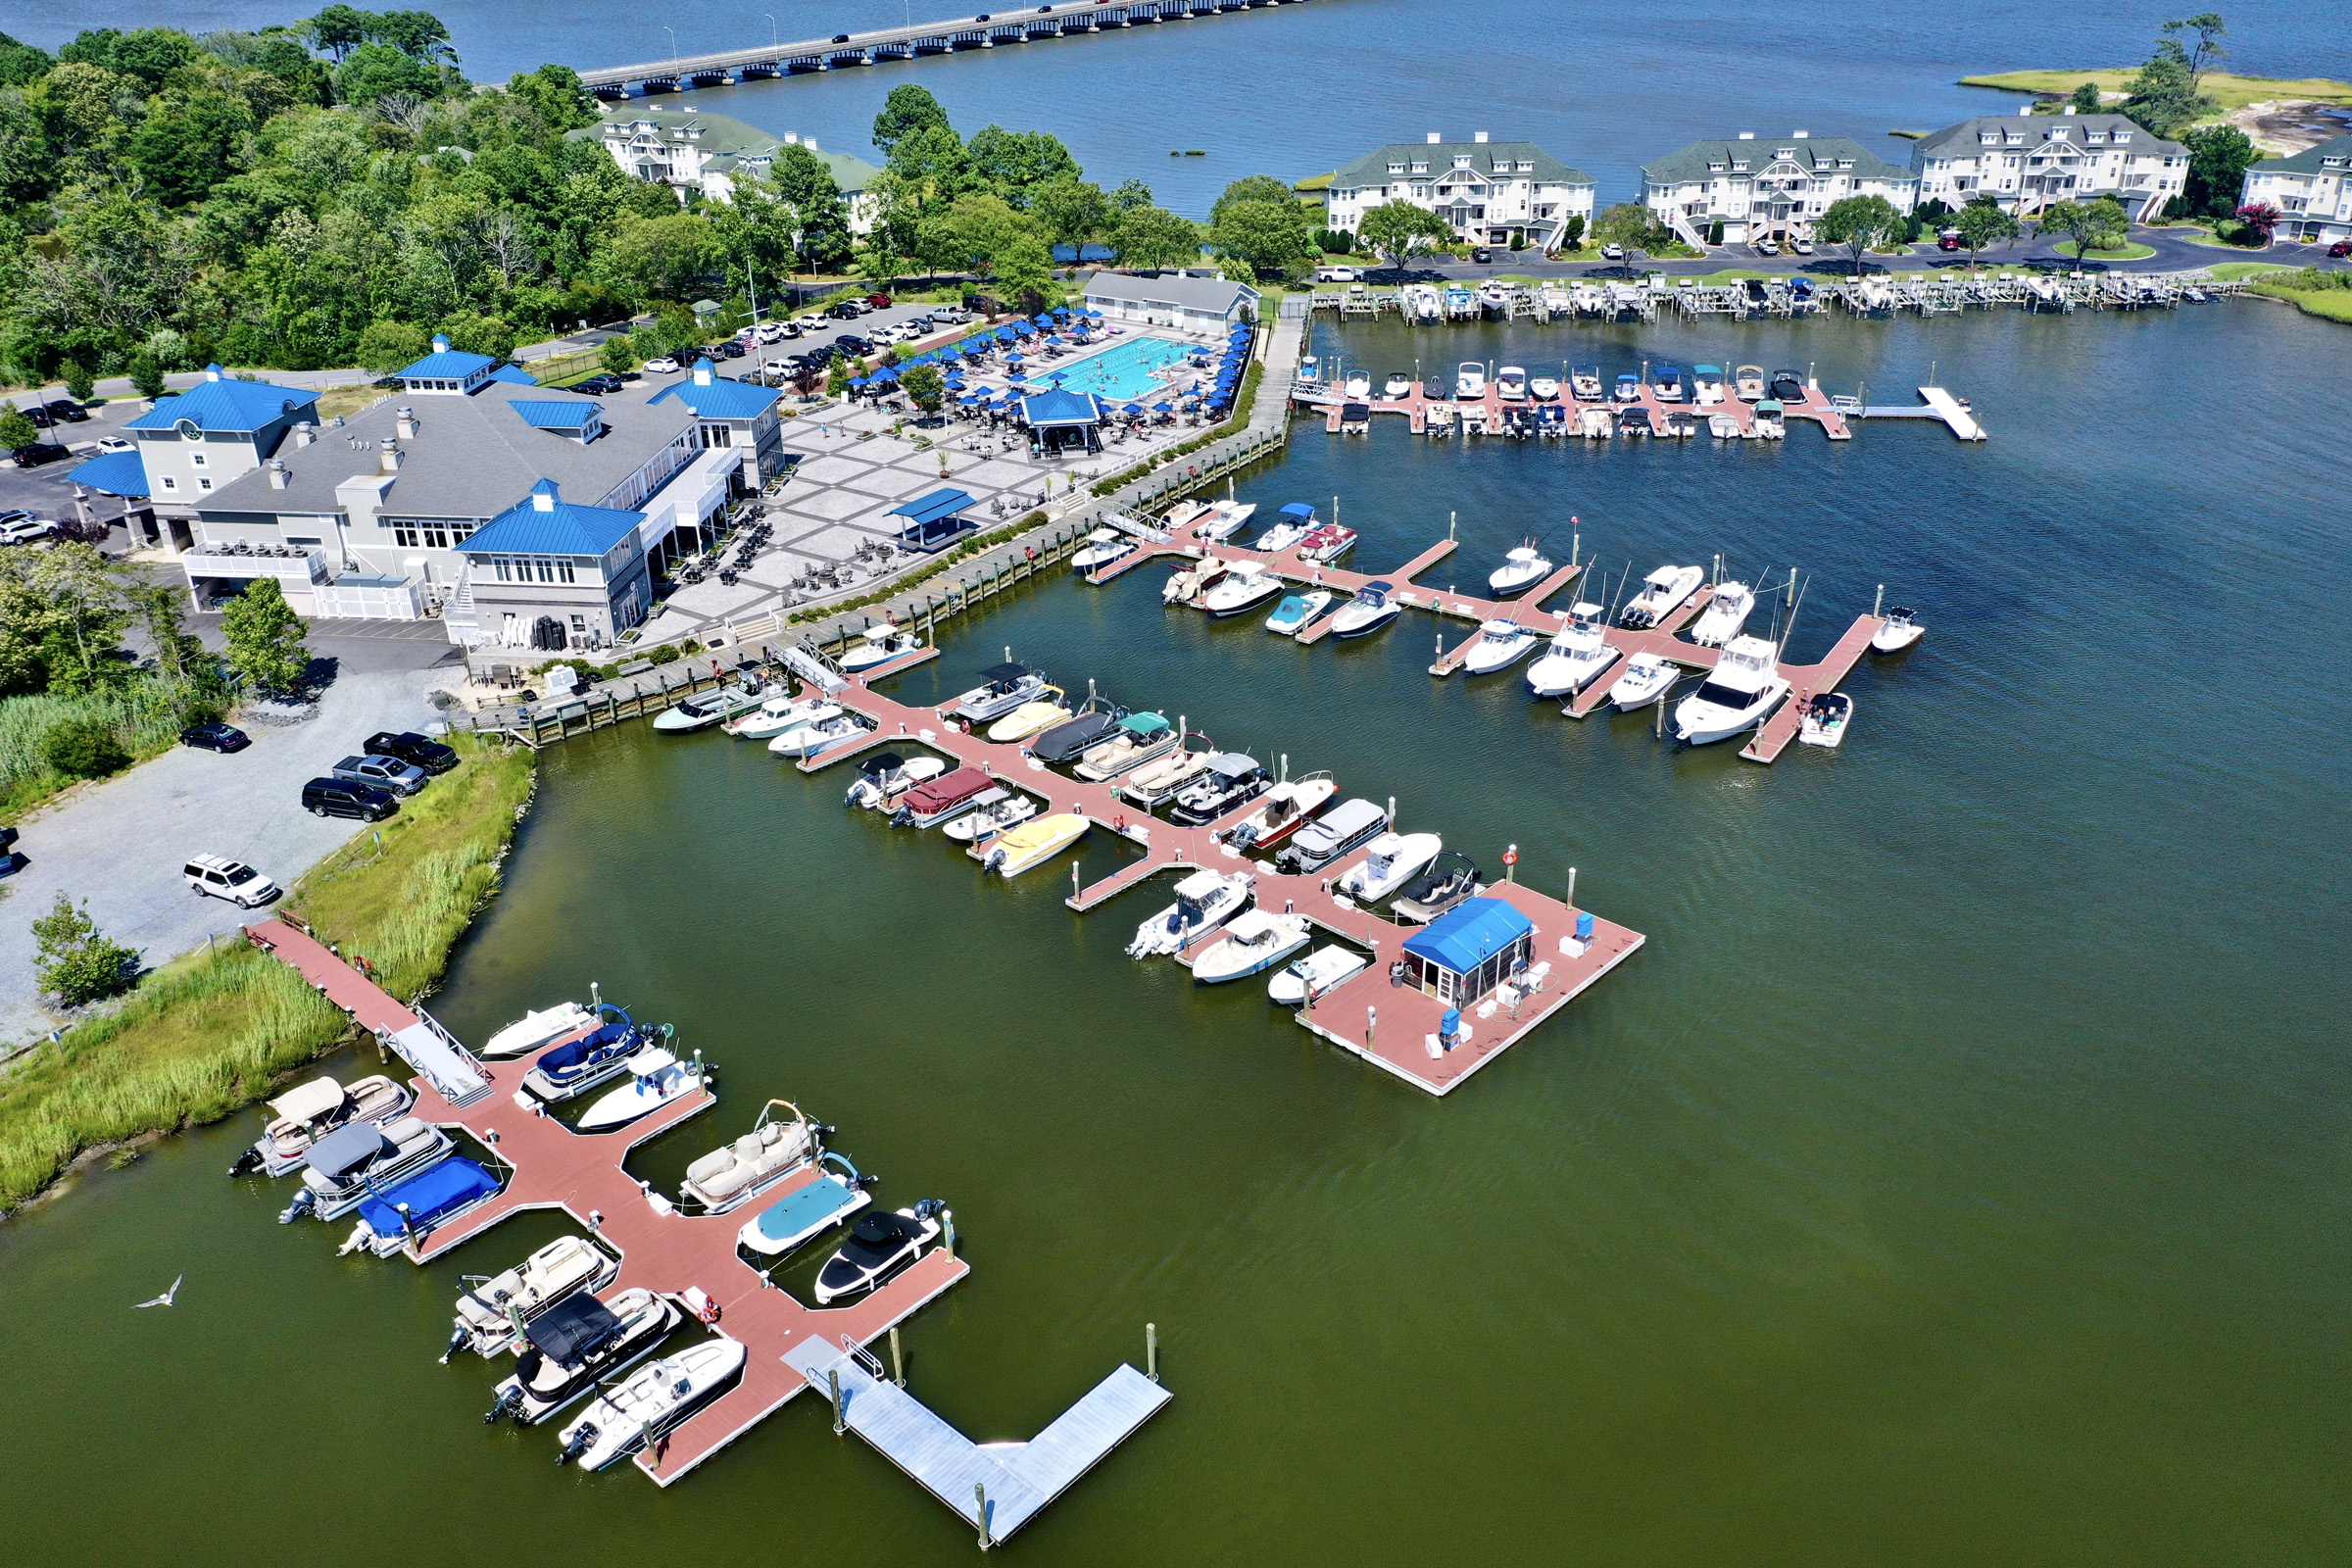 drone view of docked boats in OCMD.